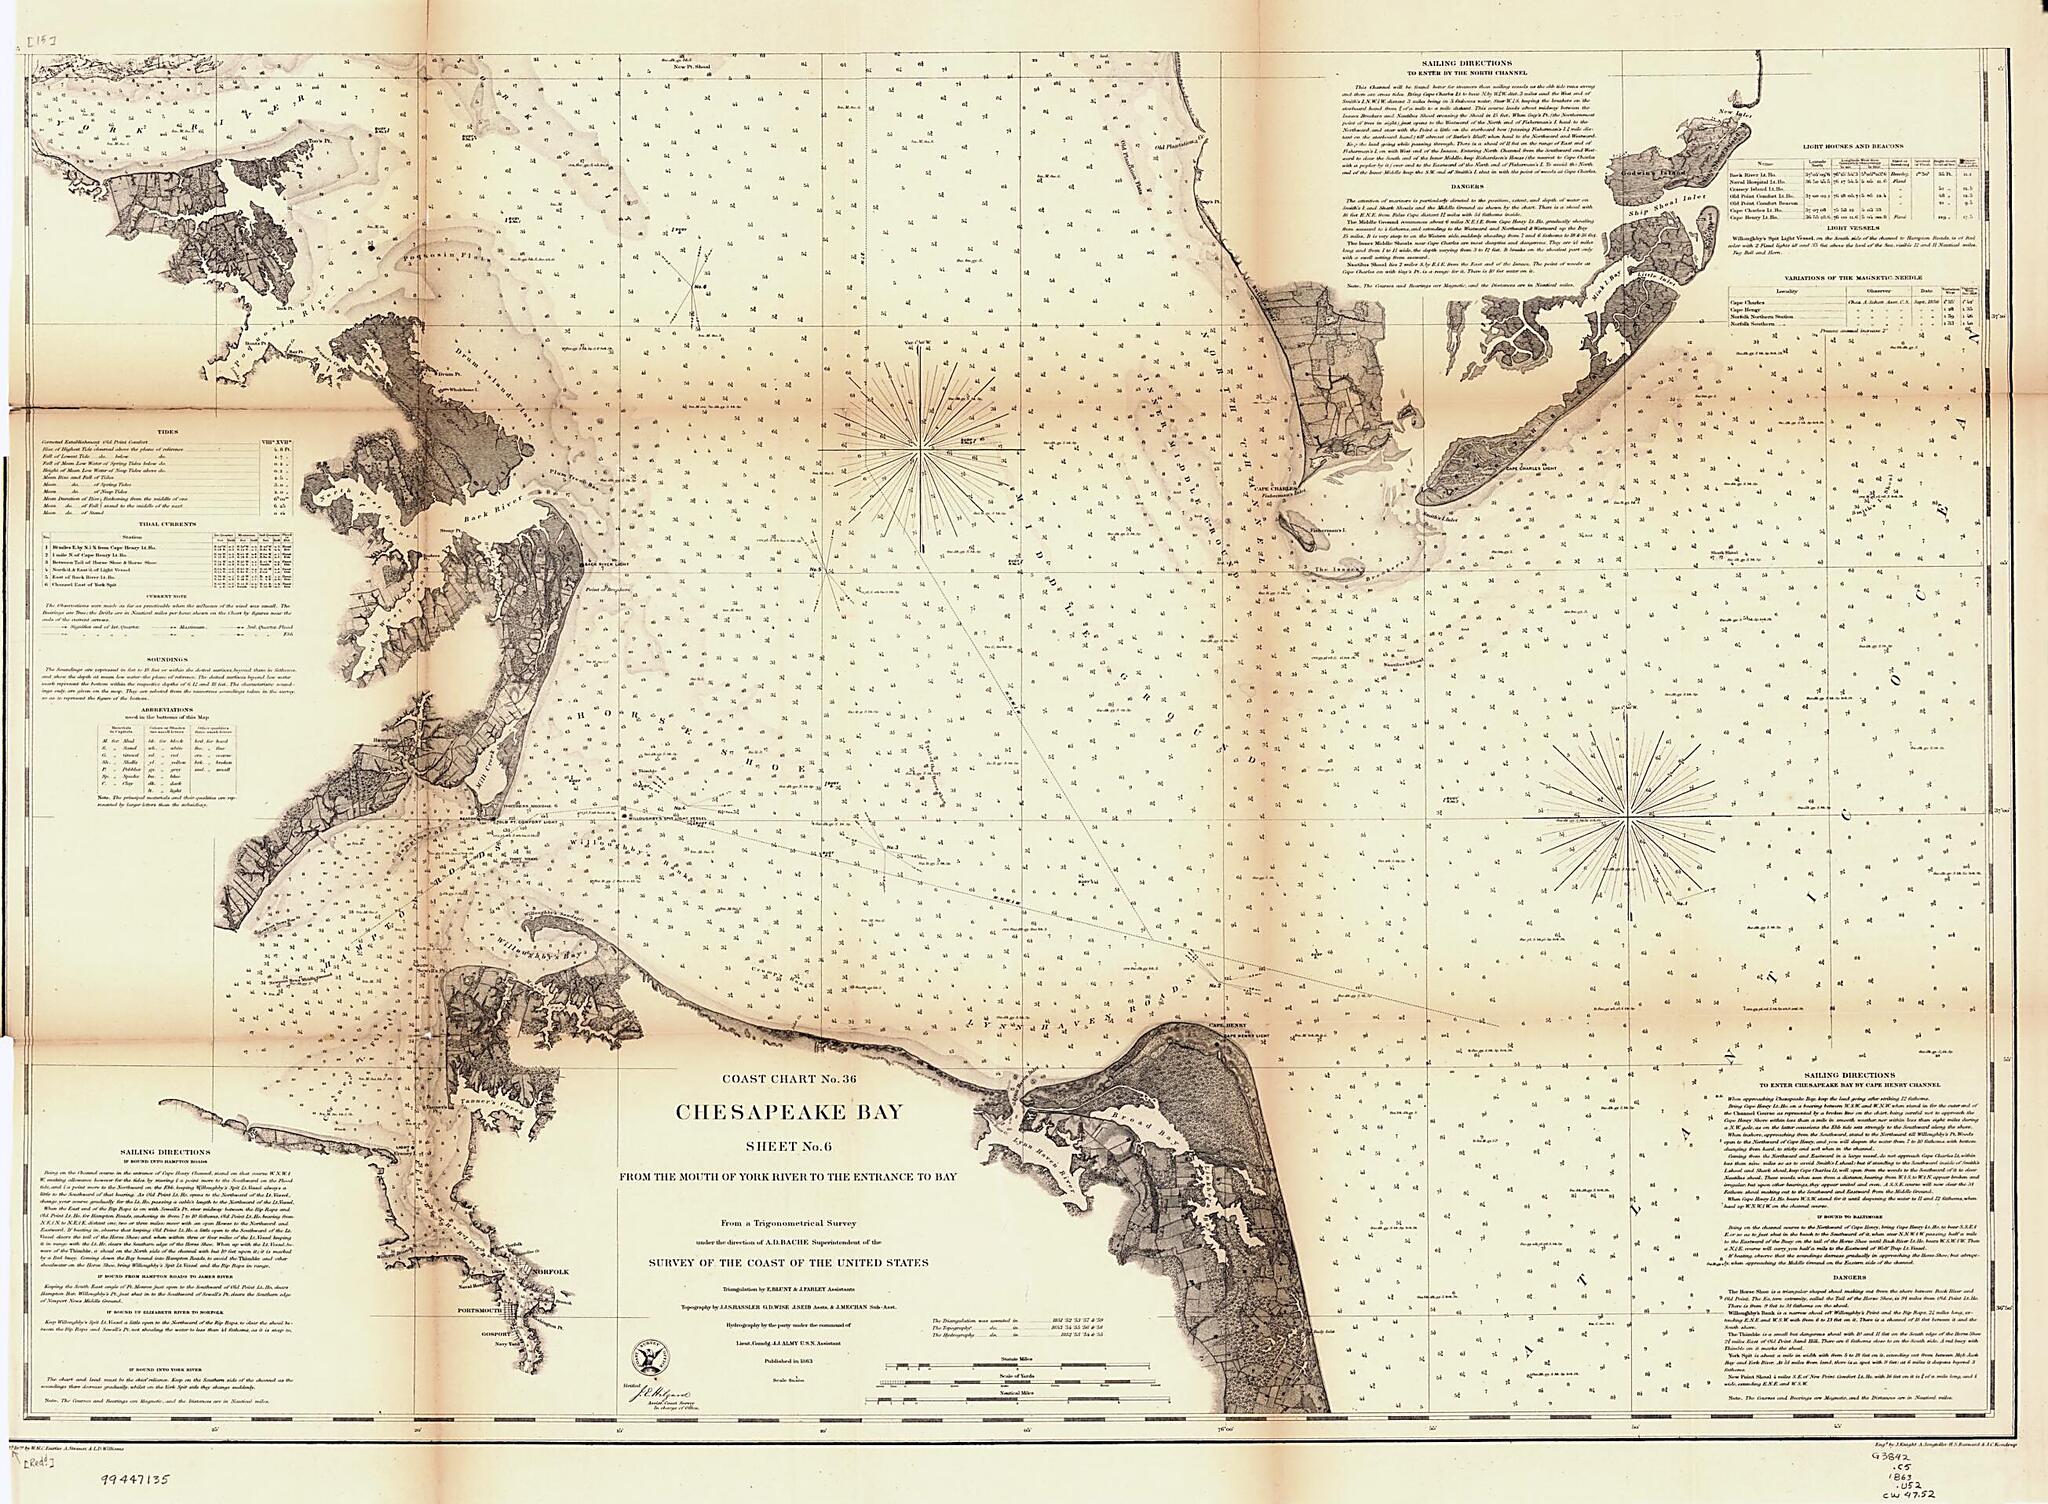 This old map of Chesapeake Bay. Sheet 6, from the Mouth of York River to the Entrance to Bay from 1863 was created by  United States Coast Survey in 1863